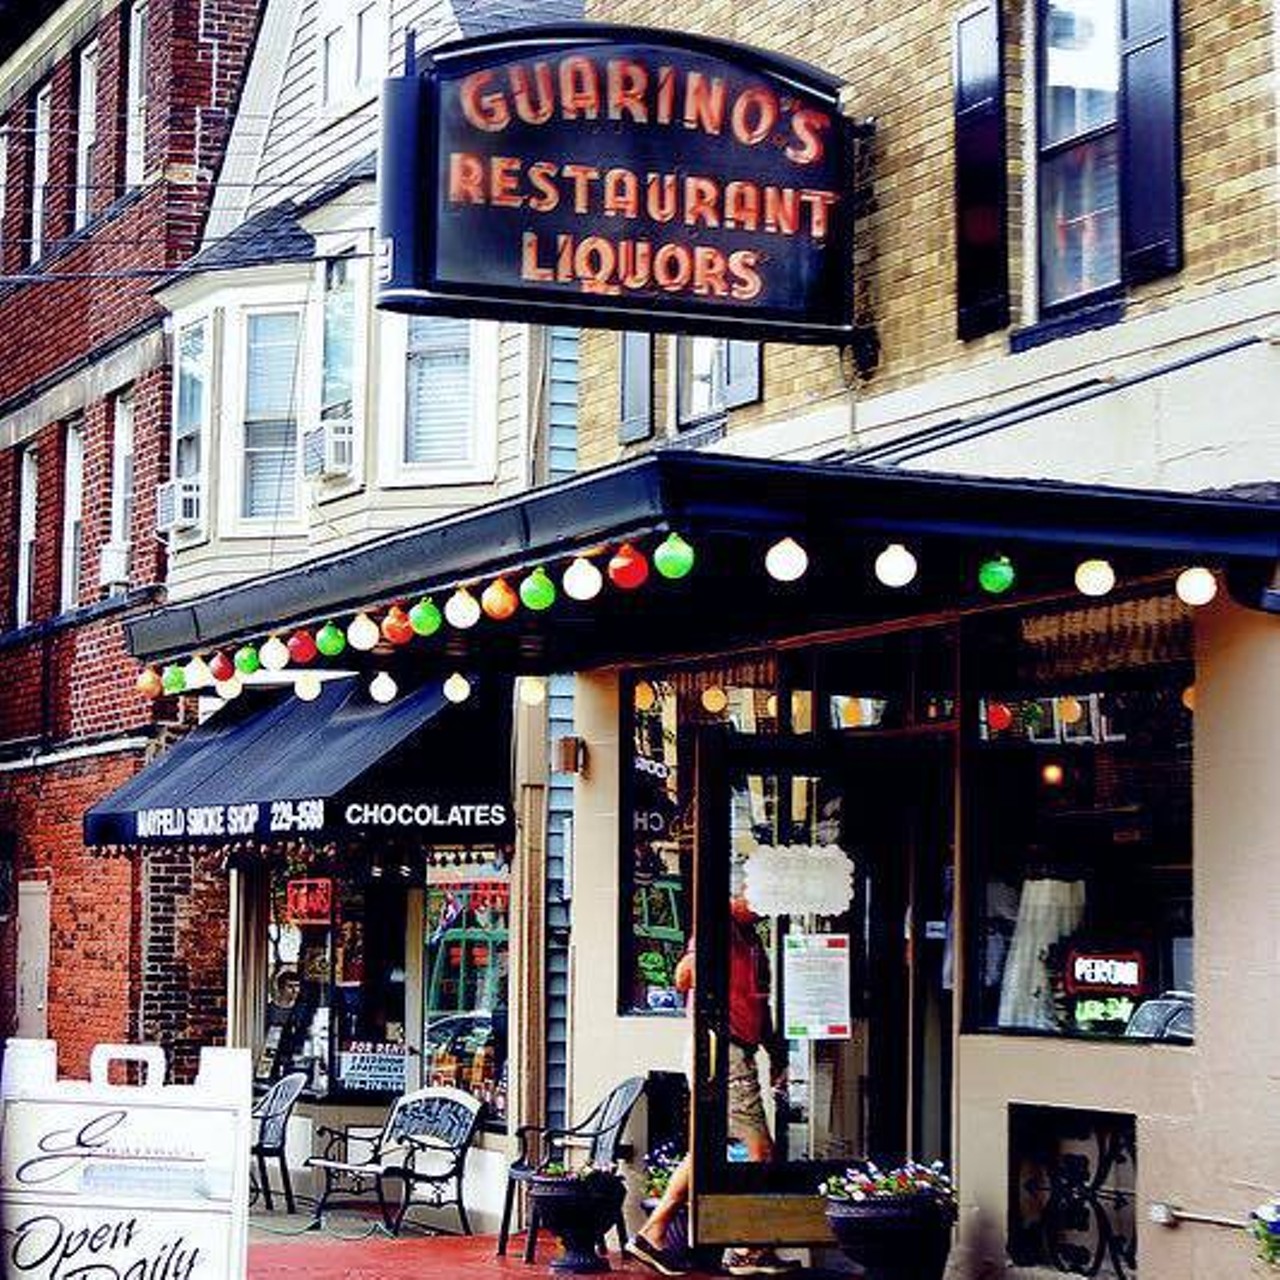  Guarino&#146;s
12309 Mayfield Rd., Cleveland
Established in 1918, Guarino's in Little Italy is Cleveland's oldest restaurants and is still a family operation. The patio&#146;s intimate and the kitchen's pasta, veal and seafood dishes are all very Italian.
Photo via Guarino&#146;s/Facebook